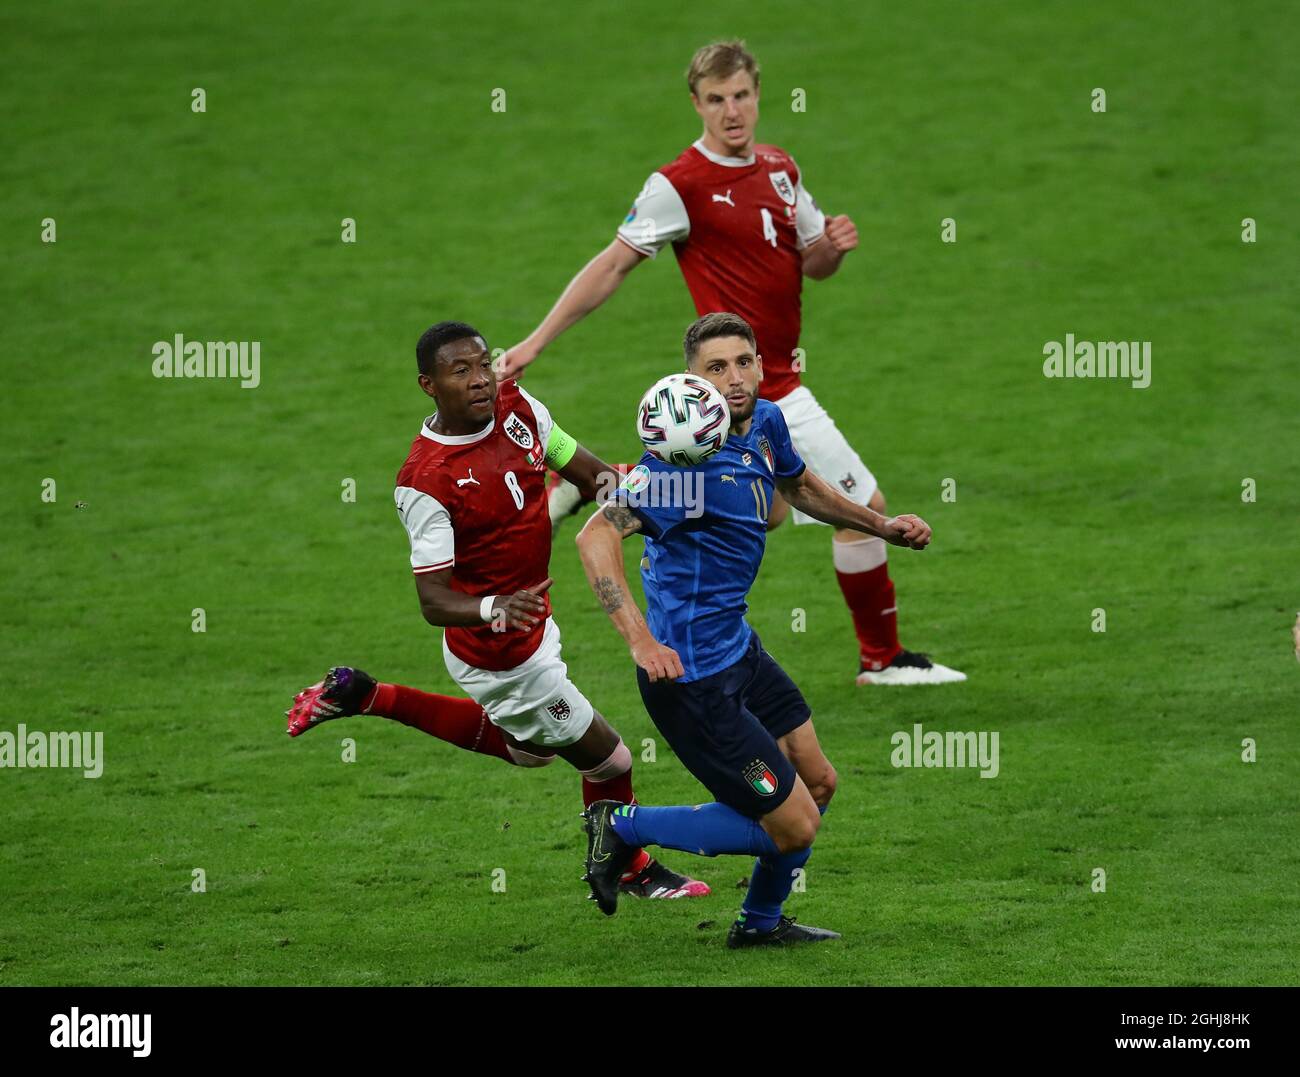 London, England, 26th June 2021. Domenico Berardi of Italy tackled by David Alaba of Austria during the UEFA European Championships match at Wembley Stadium, London. Picture credit should read: David Klein / Sportimage via PA Images Stock Photo